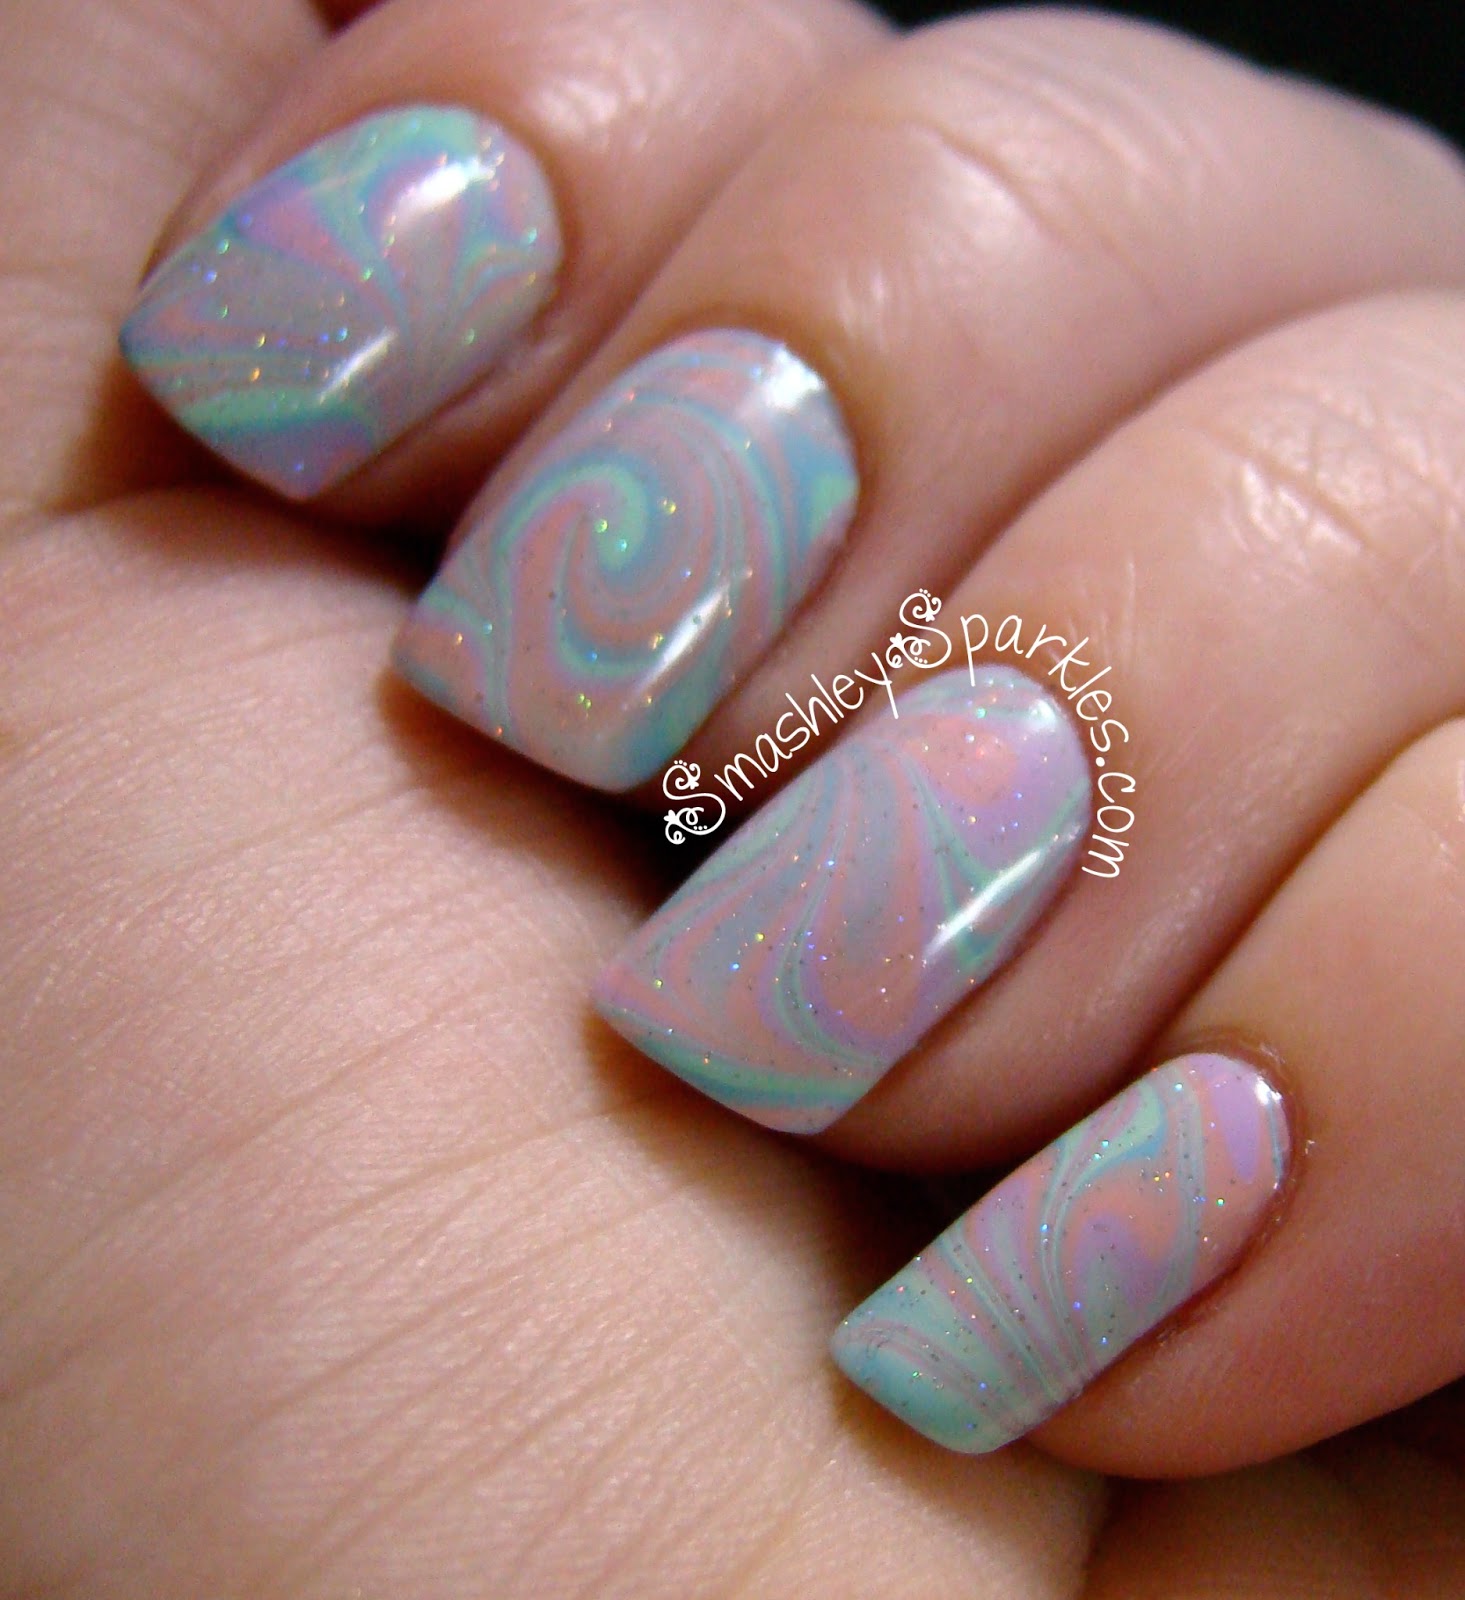 New31DC: Day 30 - Your Favorite Nail Art Technique